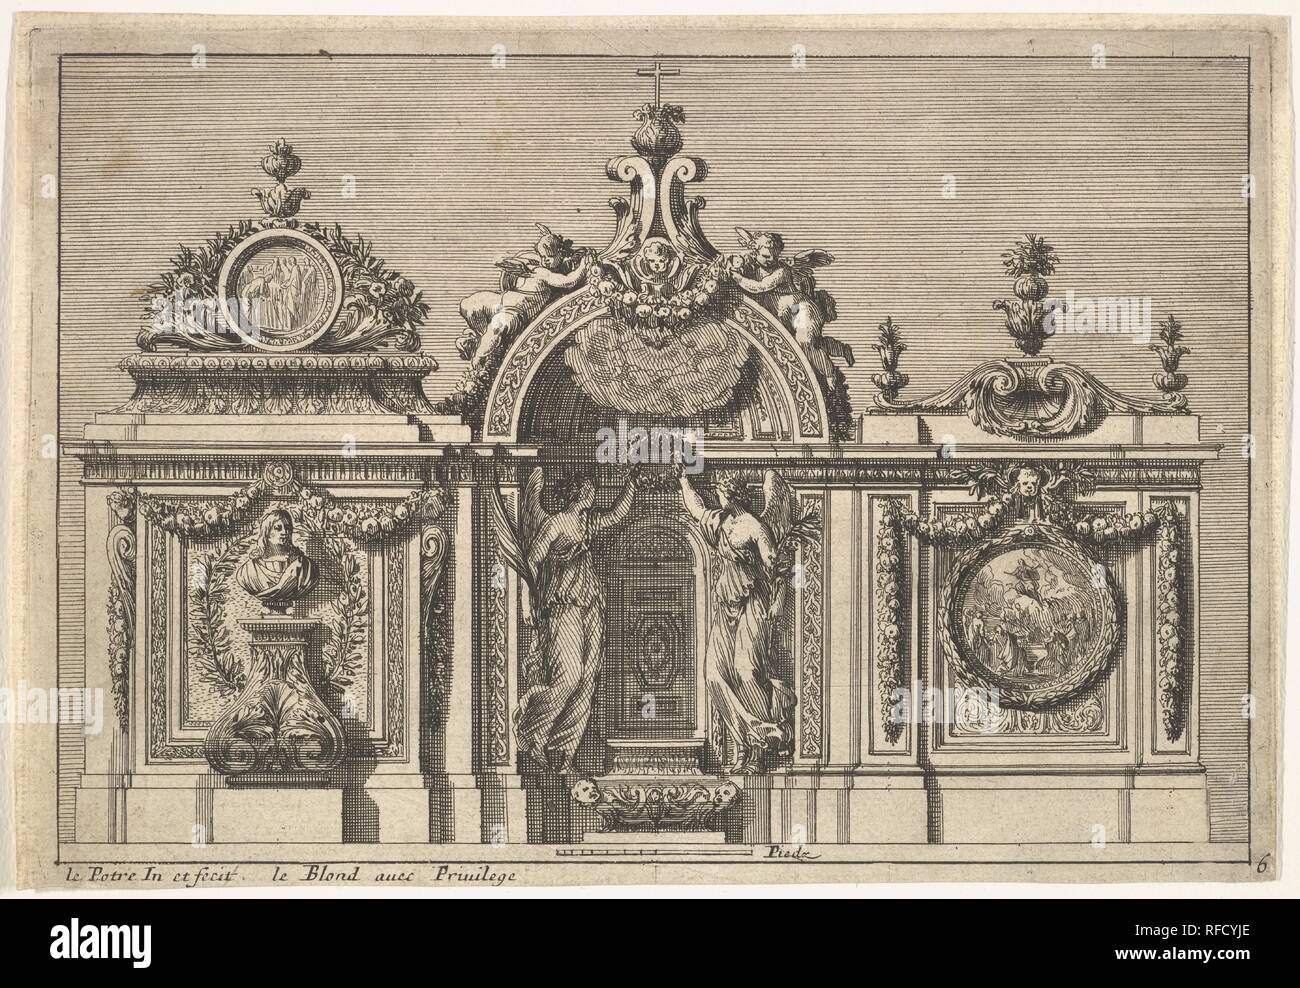 Design for a Tabernacle with Two Variants, from: Tabernacles à l'italienne. Artist: Jean Le Pautre (French, Paris 1618-1682 Paris). Dimensions: sheet: 6 1/4 x 9 1/8 in. (15.9 x 23.1 cm)  plate: 6 1/8 x 8 3/4 in. (15.6 x 22.2 cm). Publisher: Jean I Leblond (French, ca. 1590-1666 Paris). Date: ca. 1644-66. Museum: Metropolitan Museum of Art, New York, USA. Stock Photo